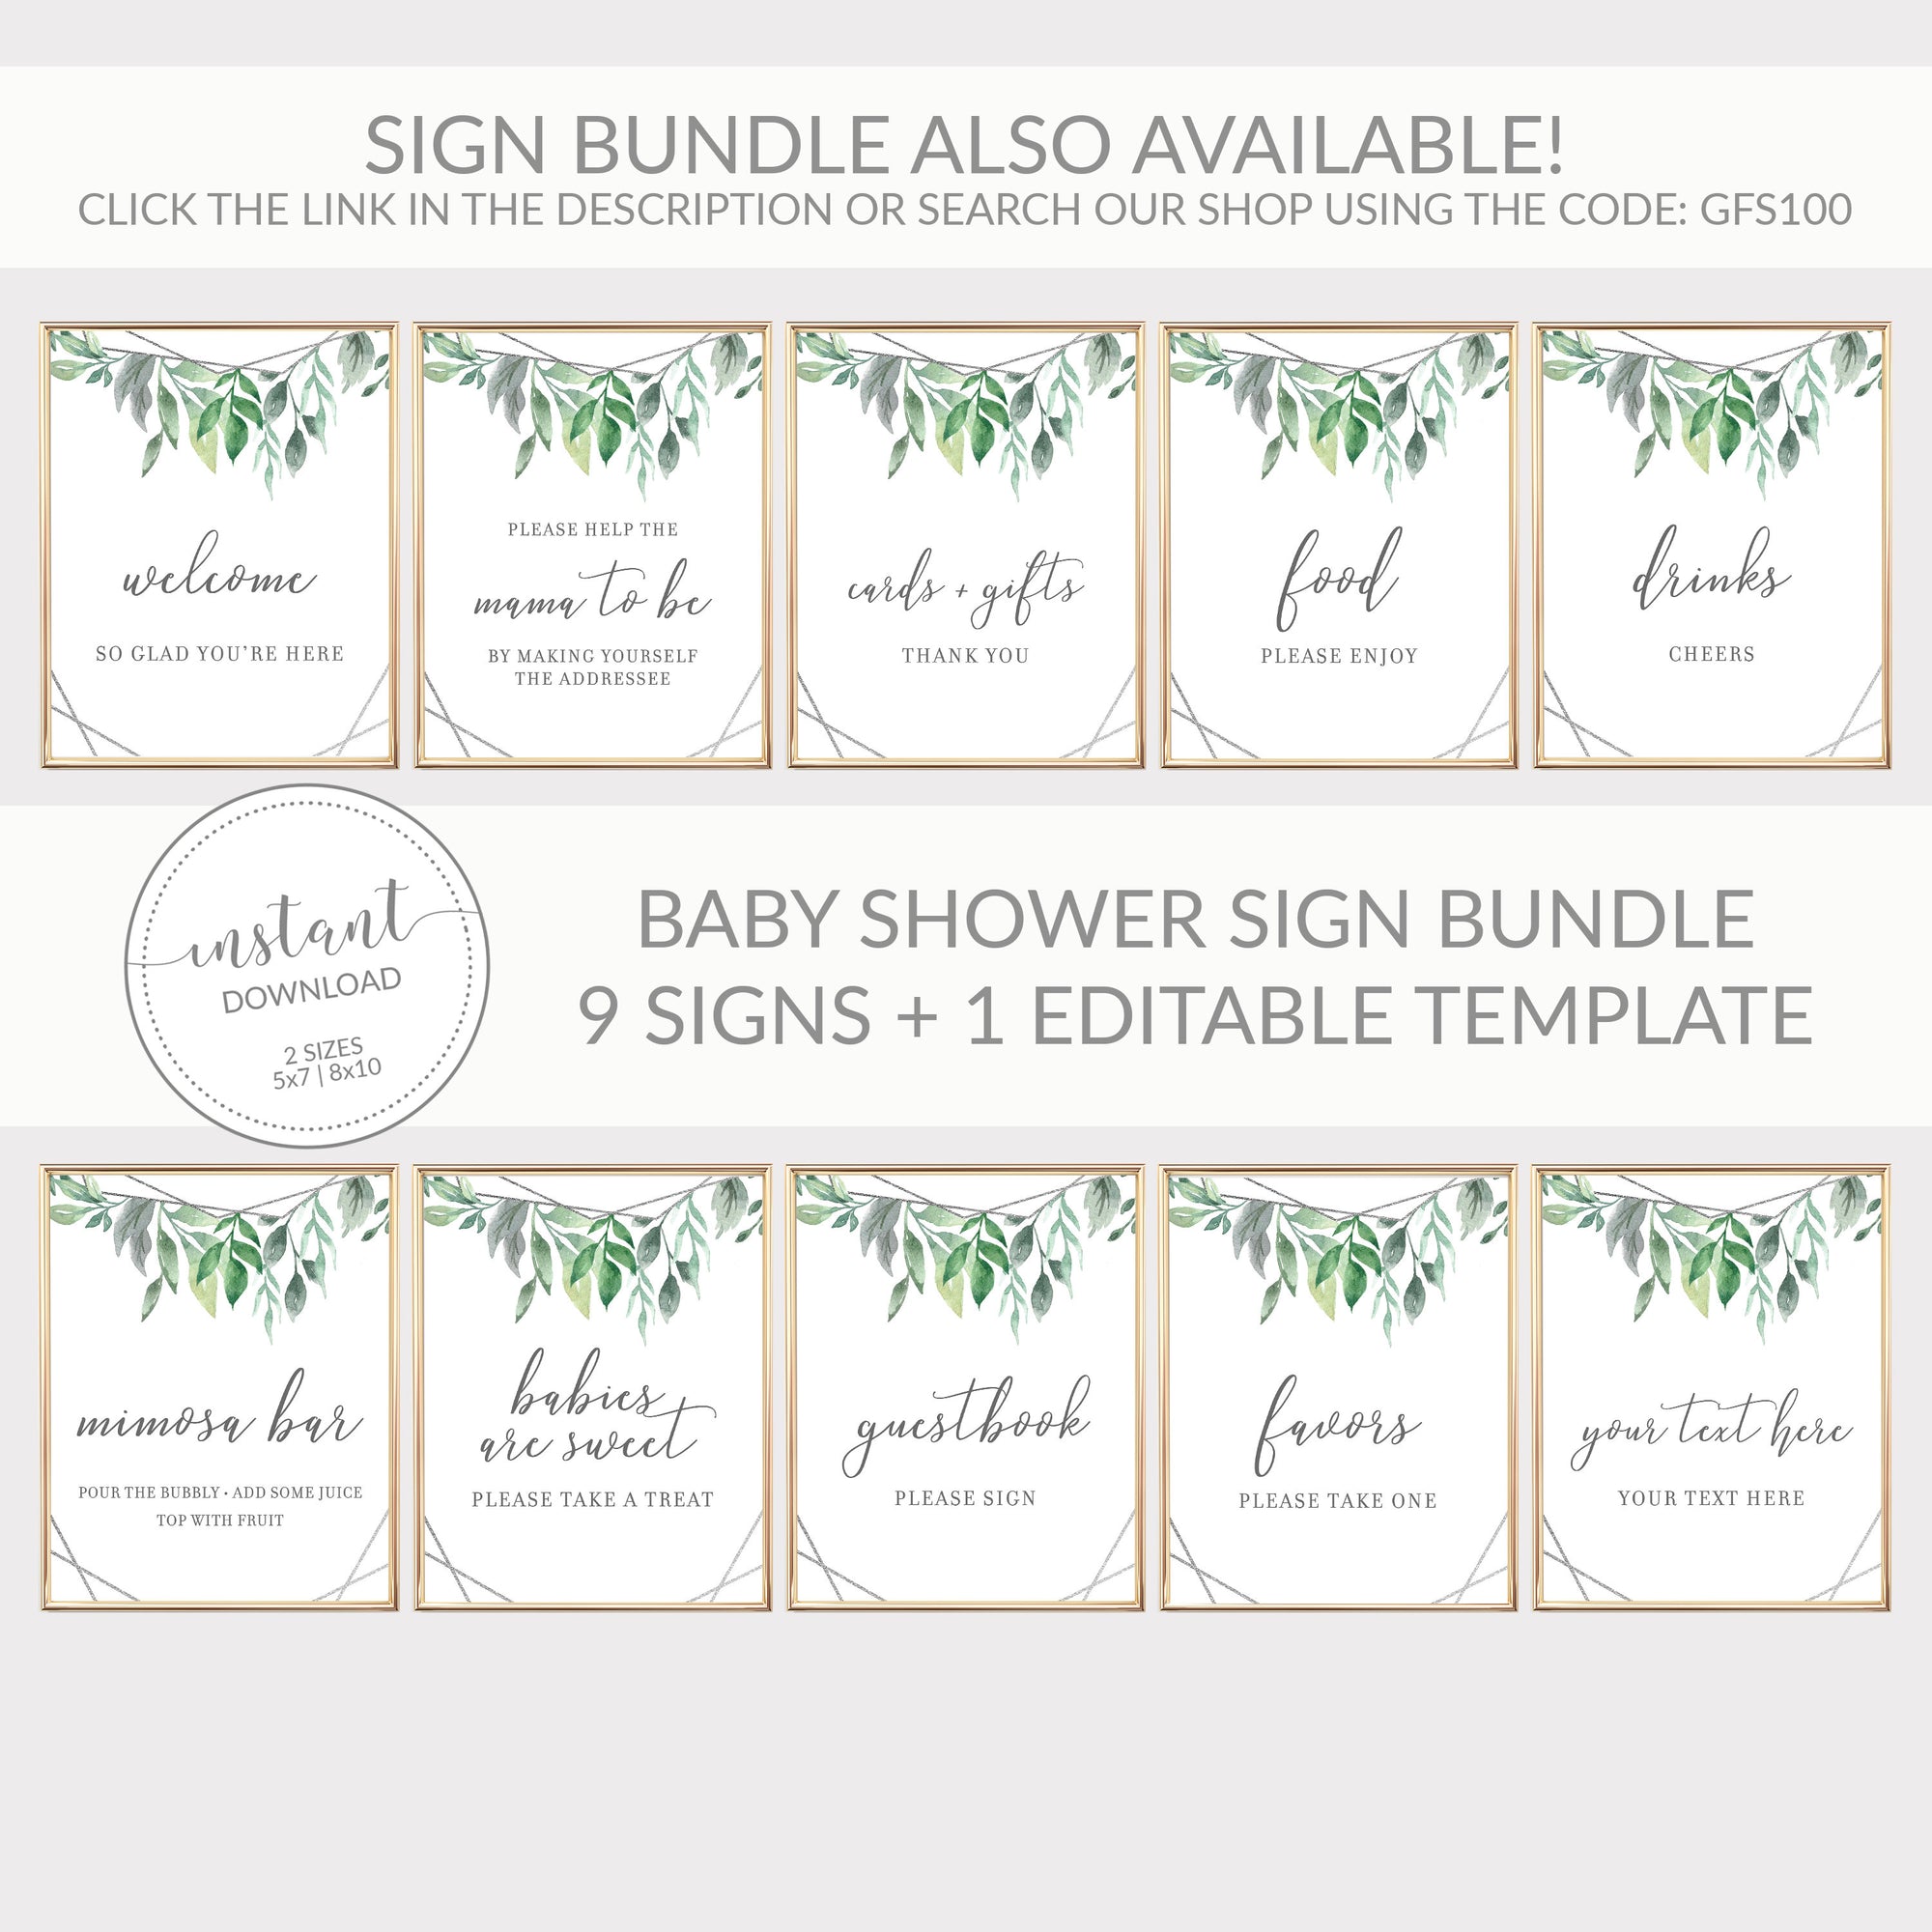 Geometric Silver Greenery Printable Treat Sign, INSTANT DOWNLOAD, Baby Shower Decorations, Sip and See Babies Are Sweet Dessert - GFS100 - @PlumPolkaDot 